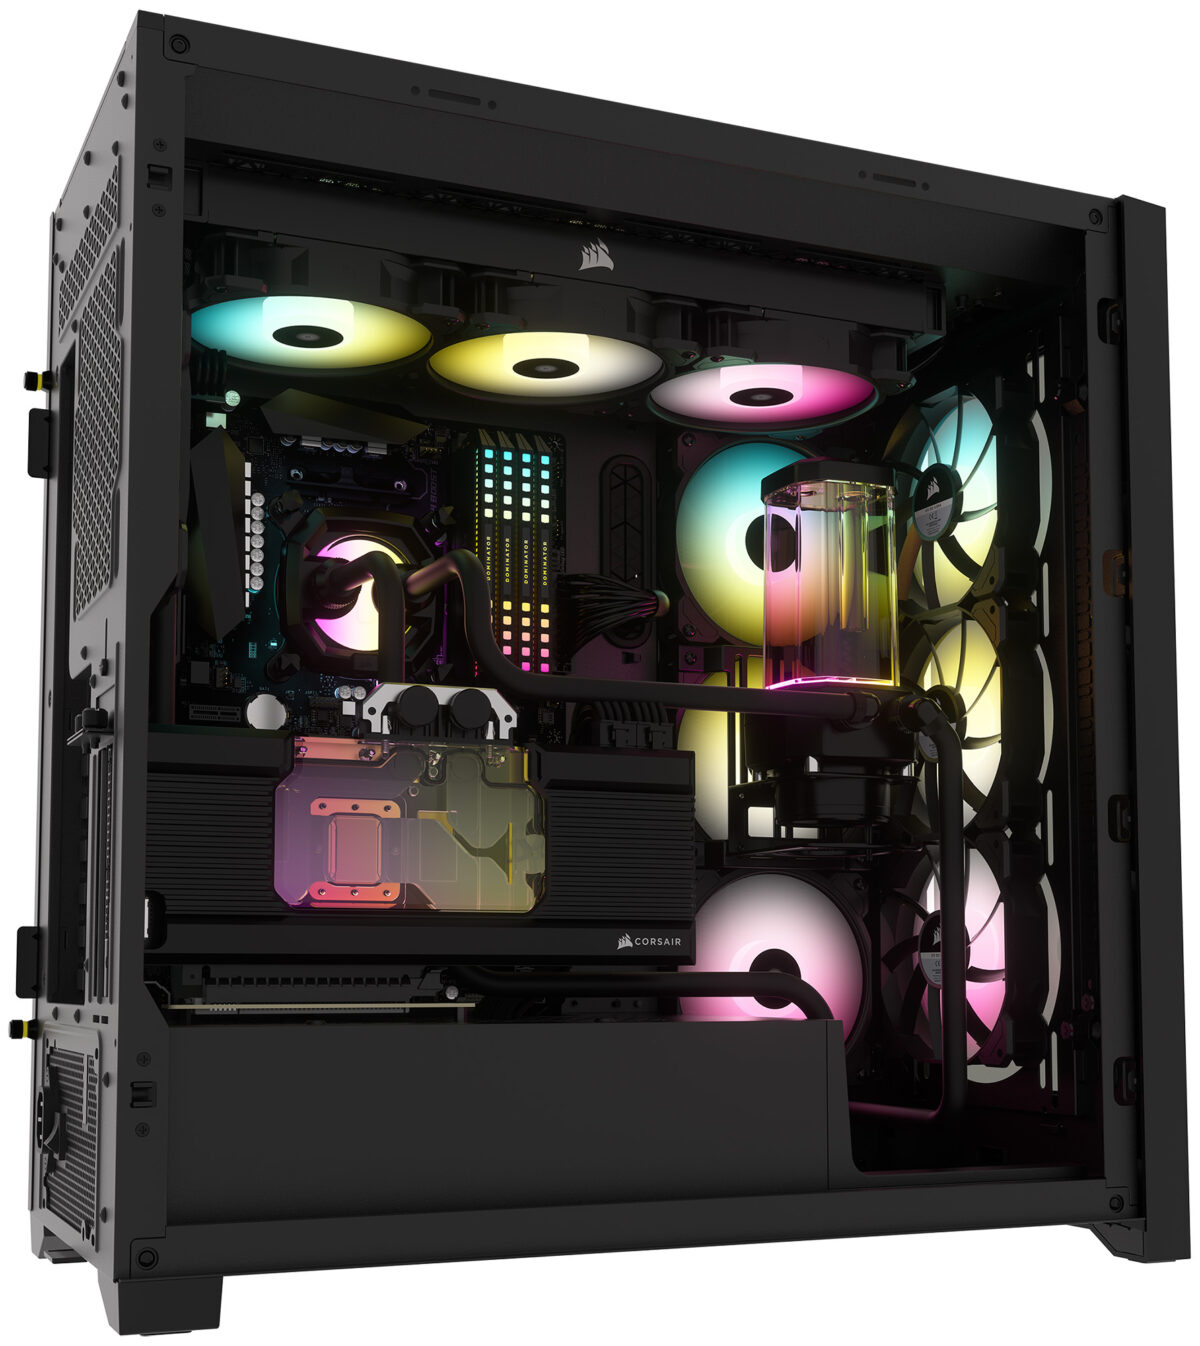 Corsair Announces Three New Mid-tower Chassis: 5000D, 5000D